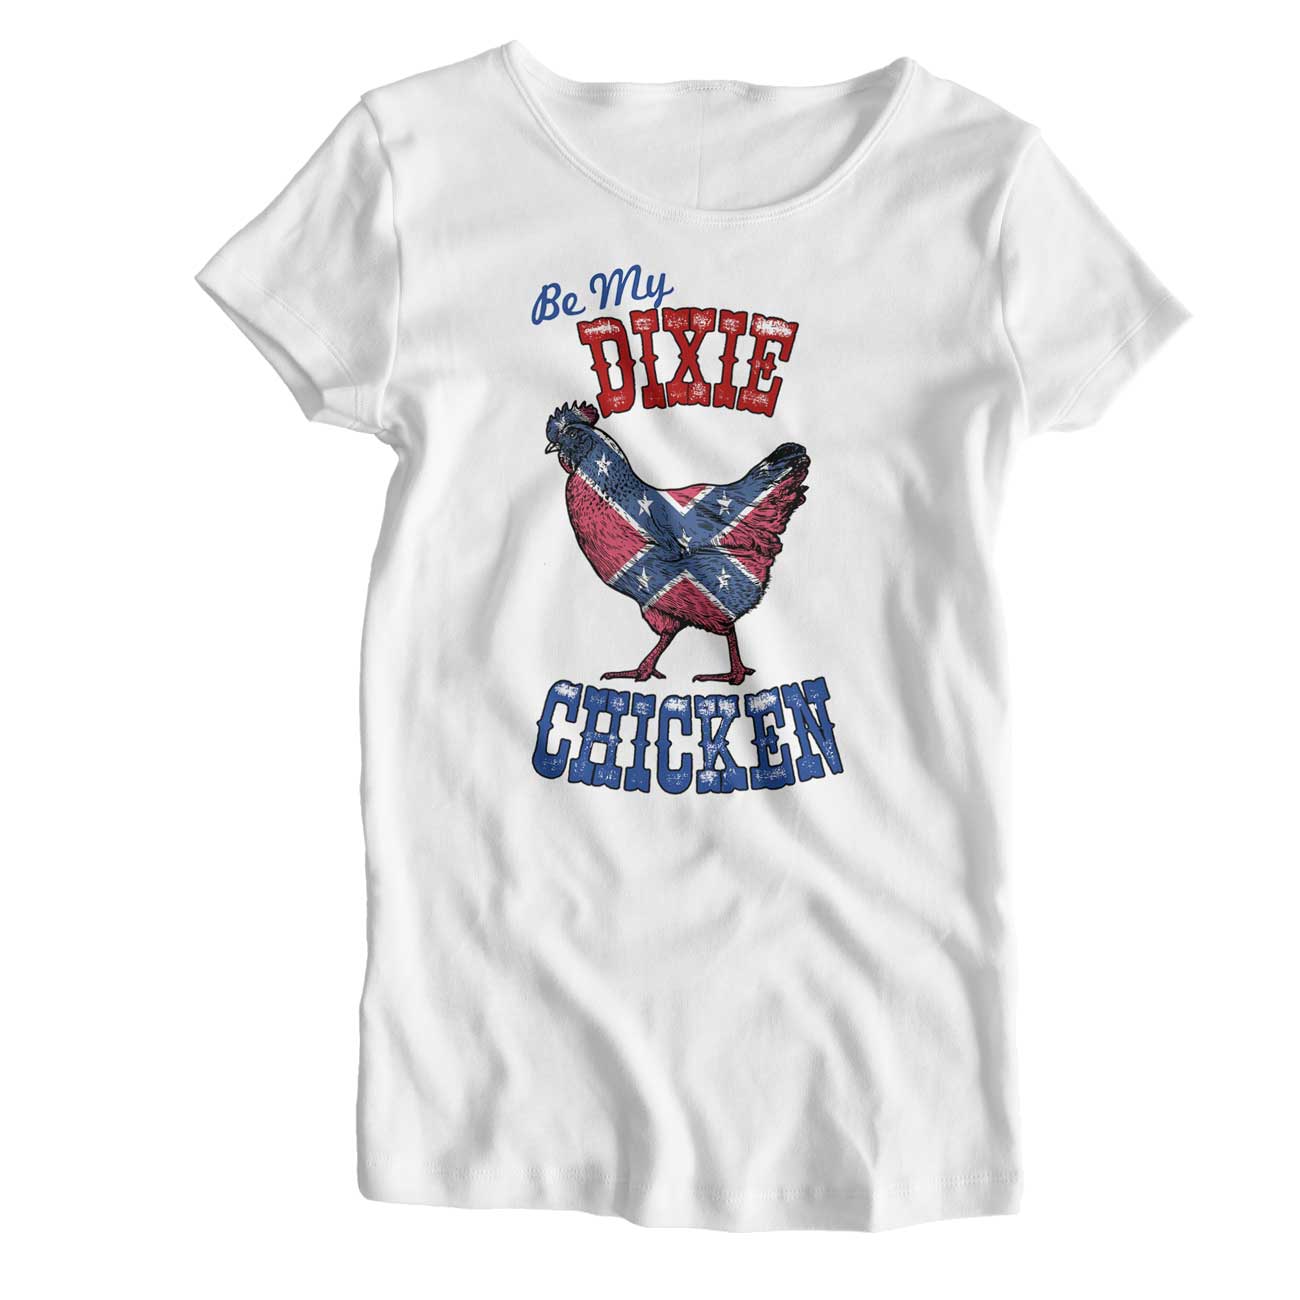 Inspired by Little Feat T Shirt - Dixie Chicken